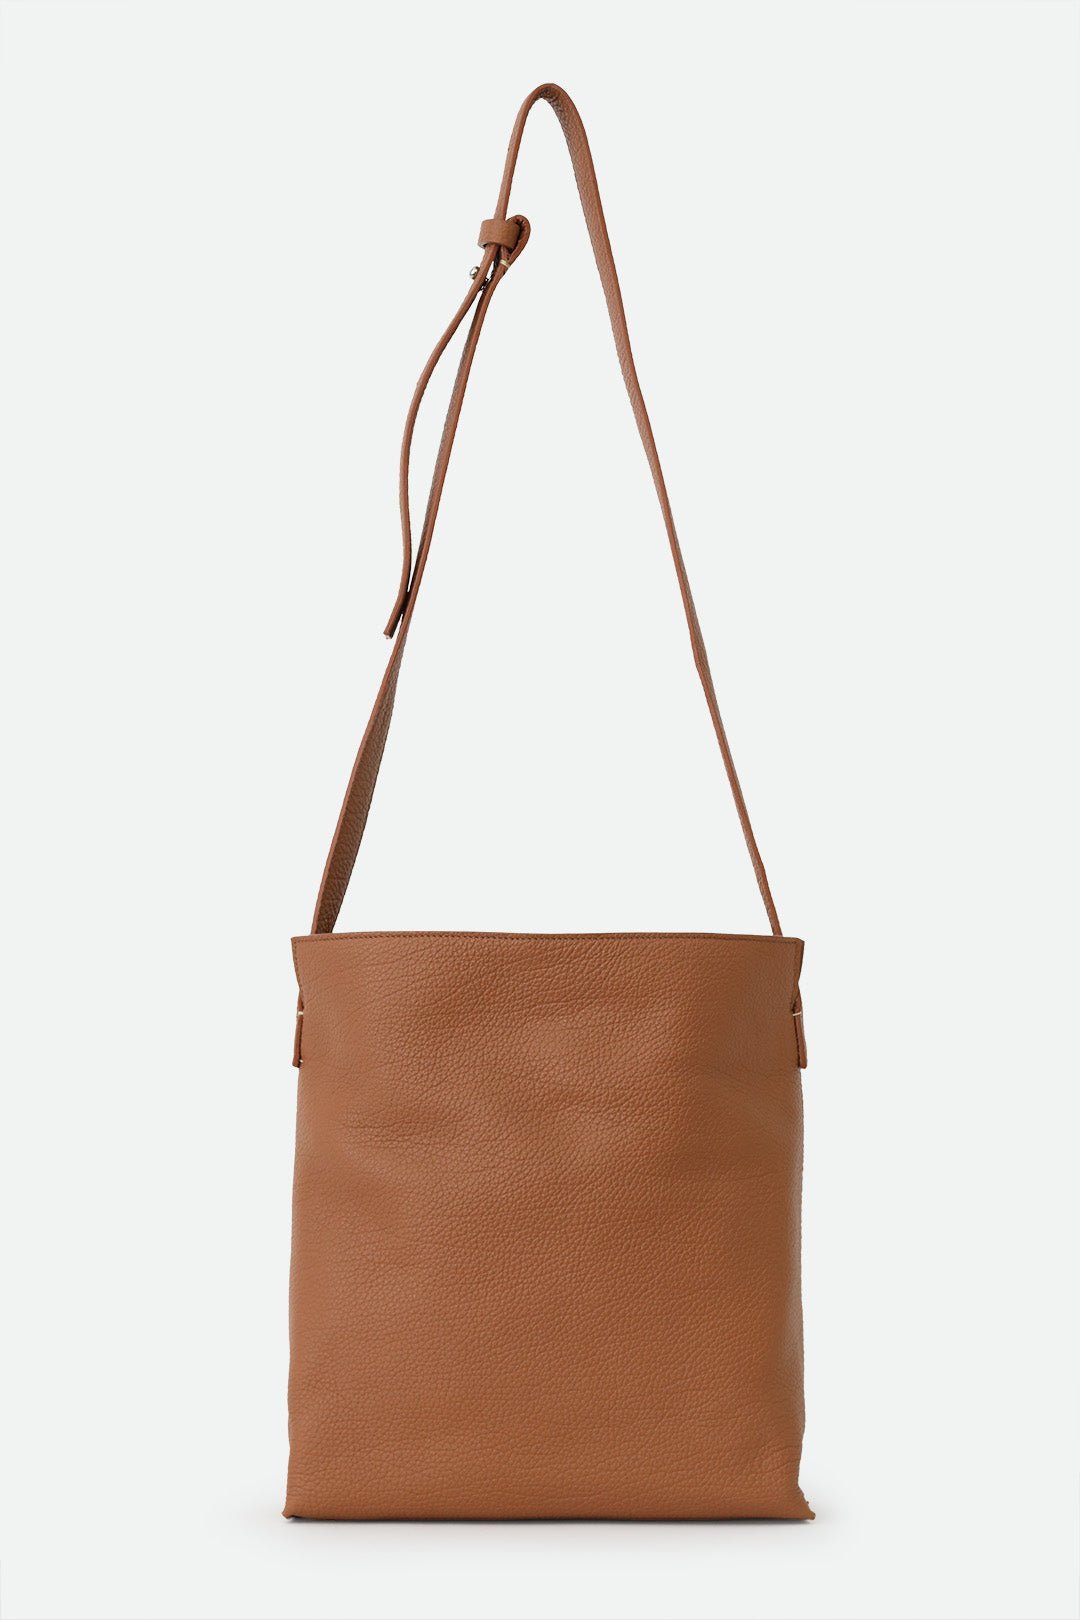 VINCENZA ITALIAN LEATHER BUCKET BAG NATURAL CUOIO - Jarbo